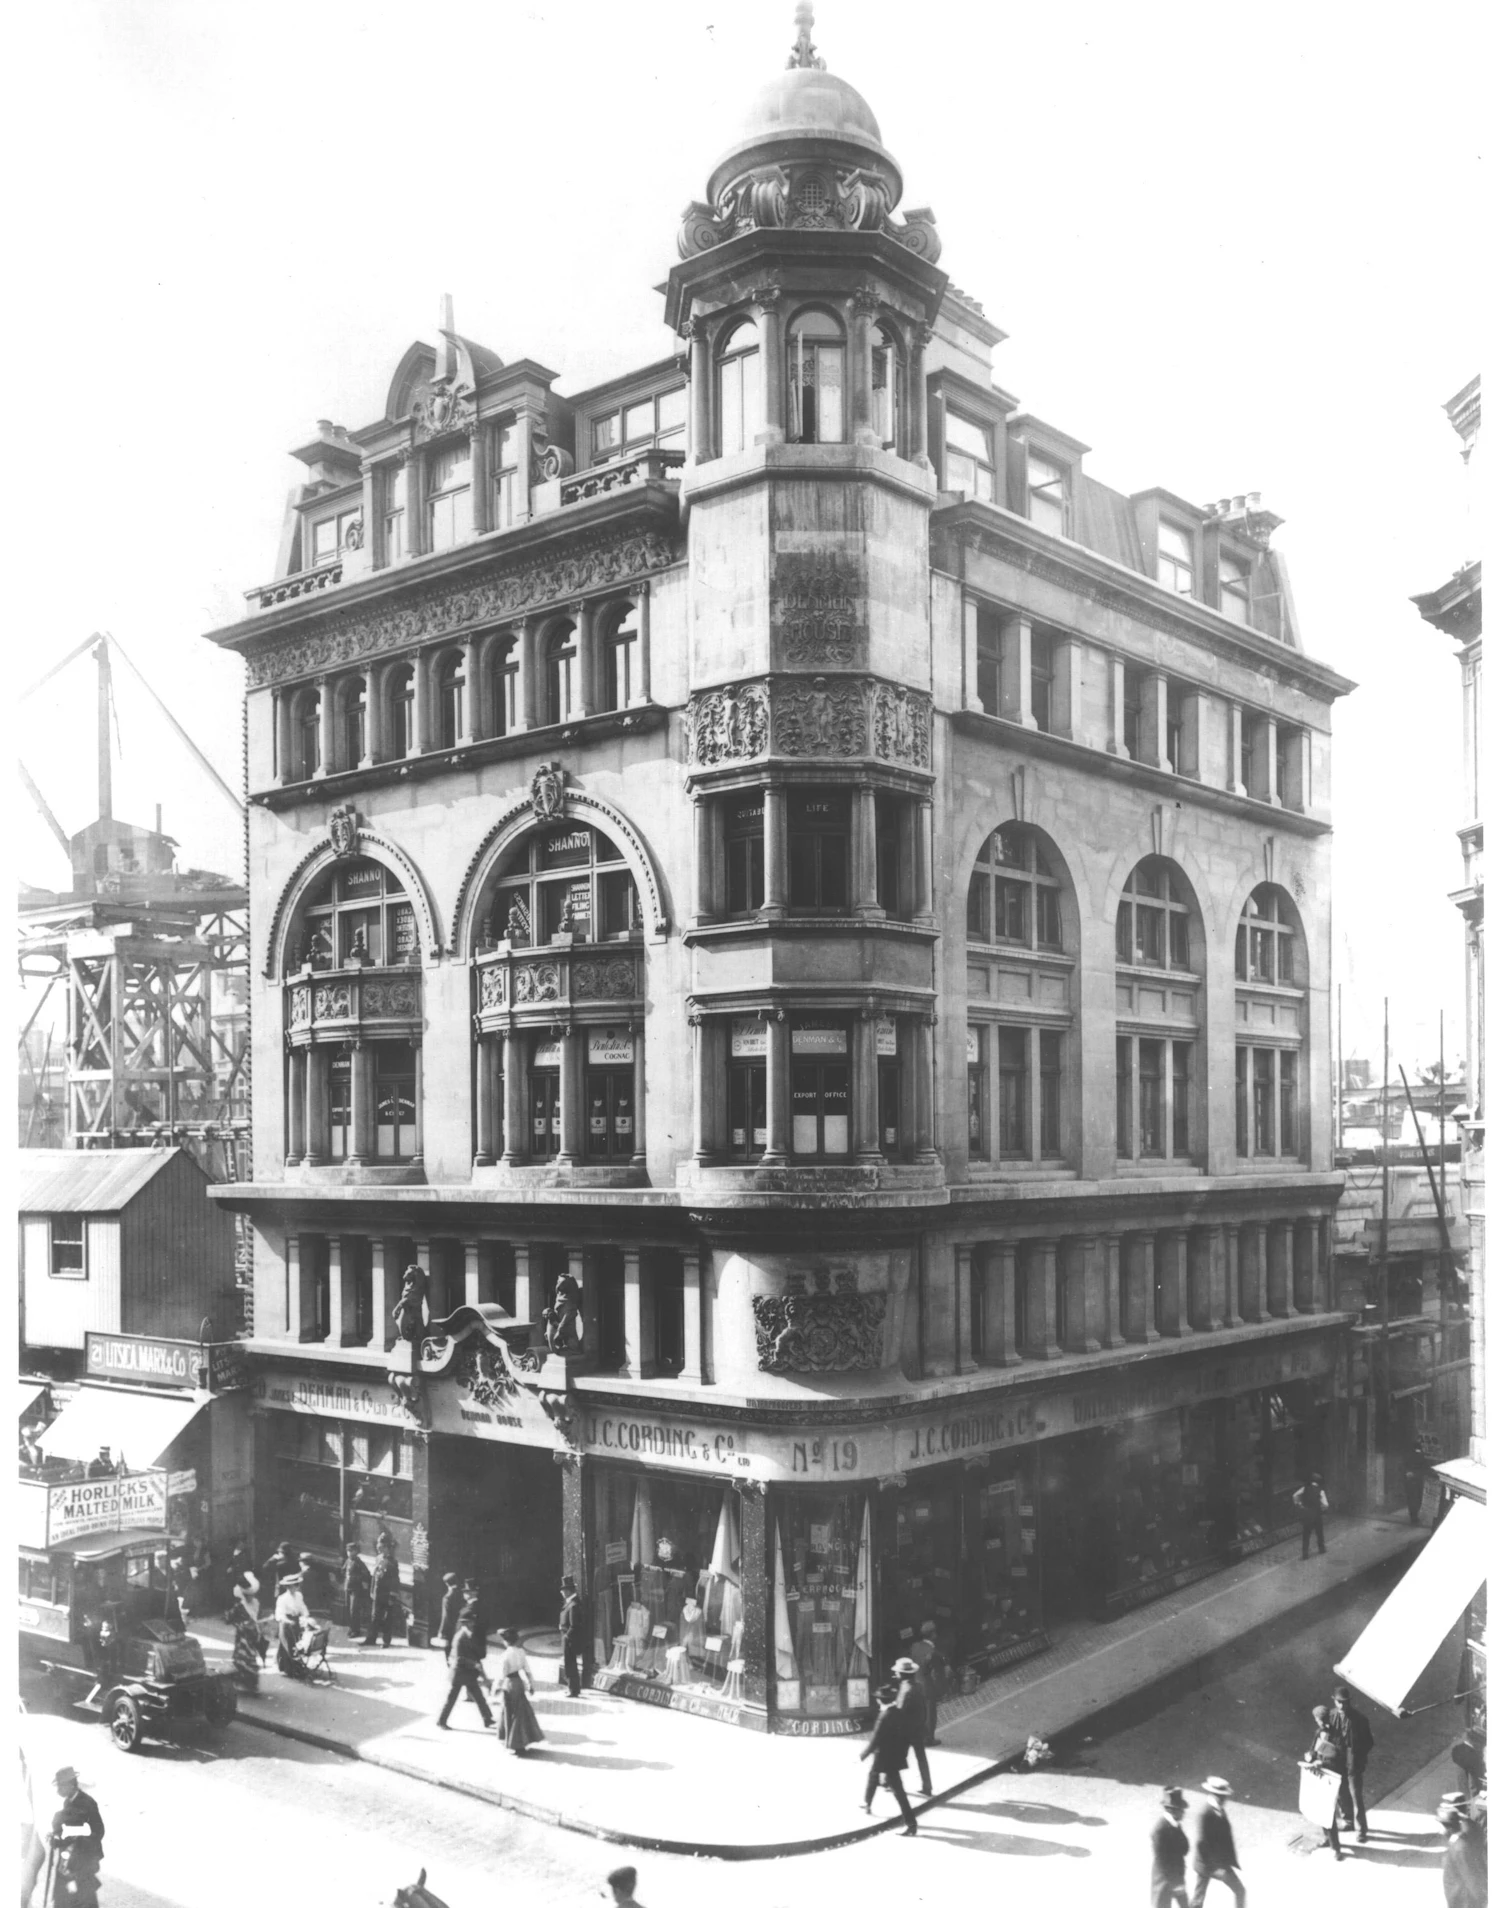 A photo of J.C.Cording & Co Limited, believed to be from around 1877